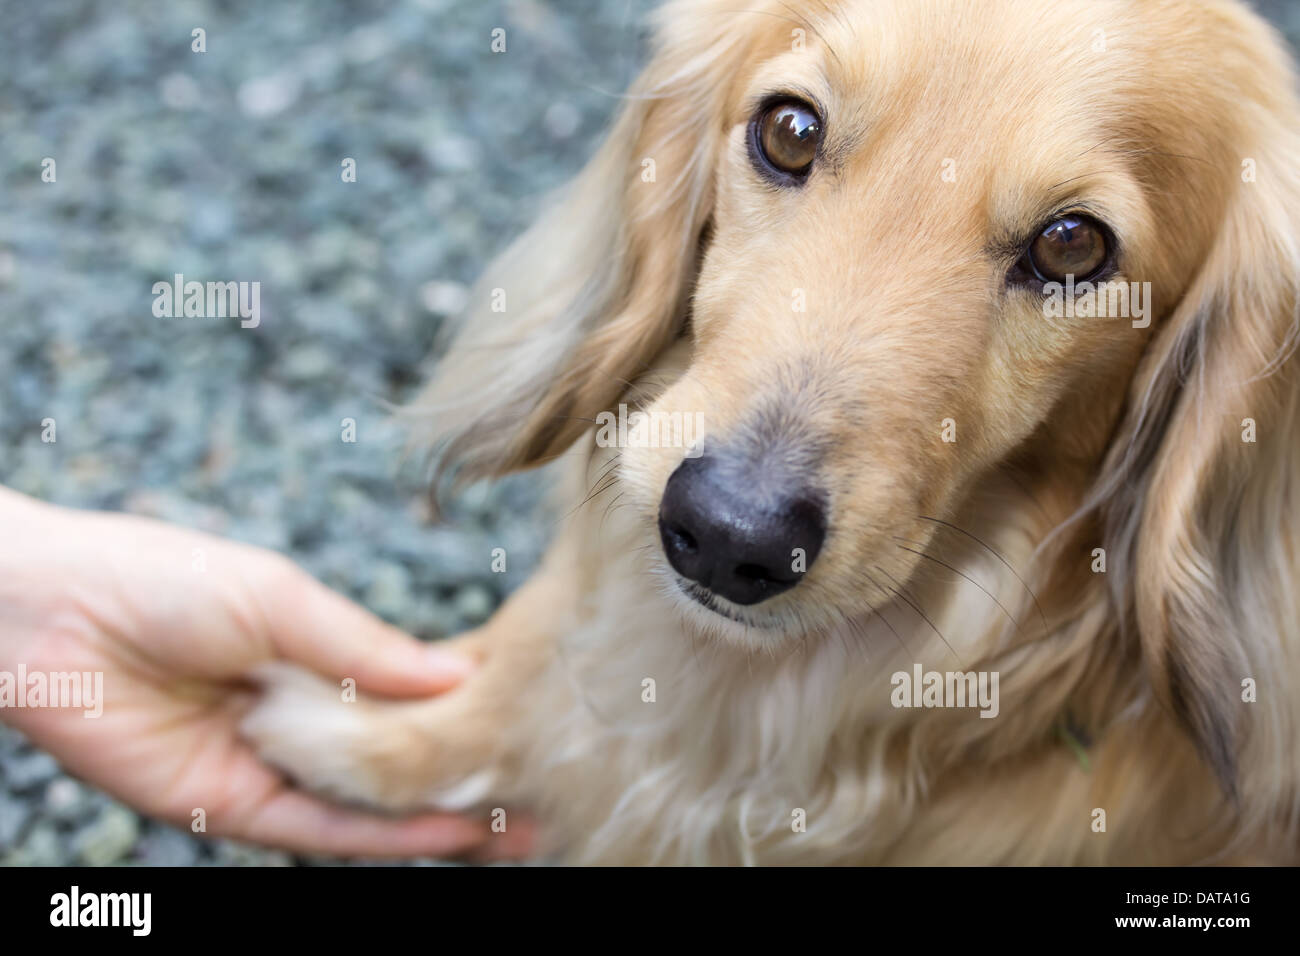 Friendship between human and dog - shaking hand and paw (blond miniature long hair dachshund) Stock Photo